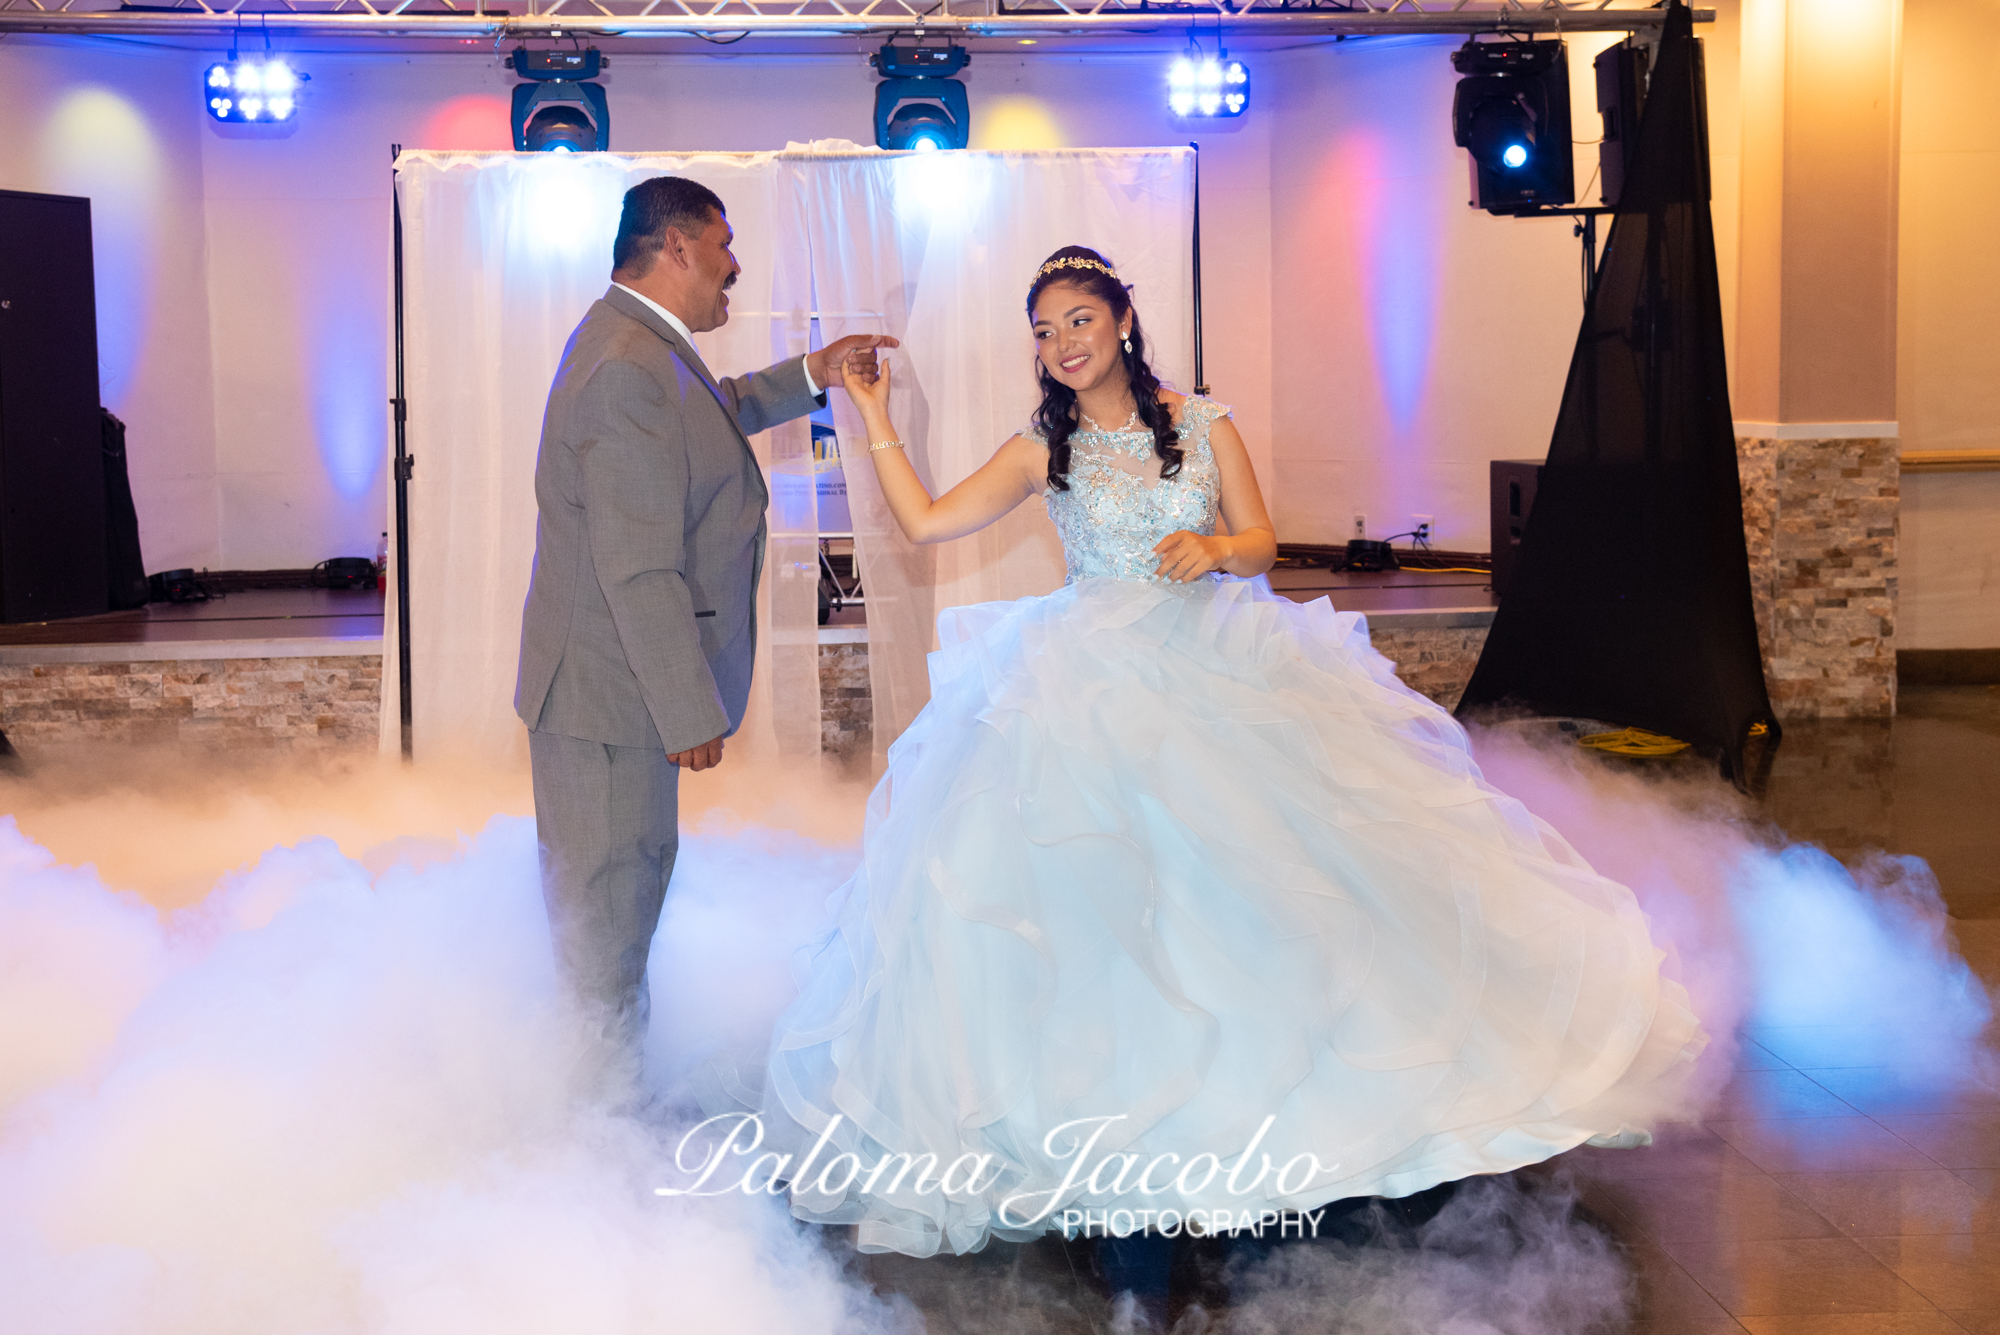 Quinceañera Party by Paloma Jacobo Photography